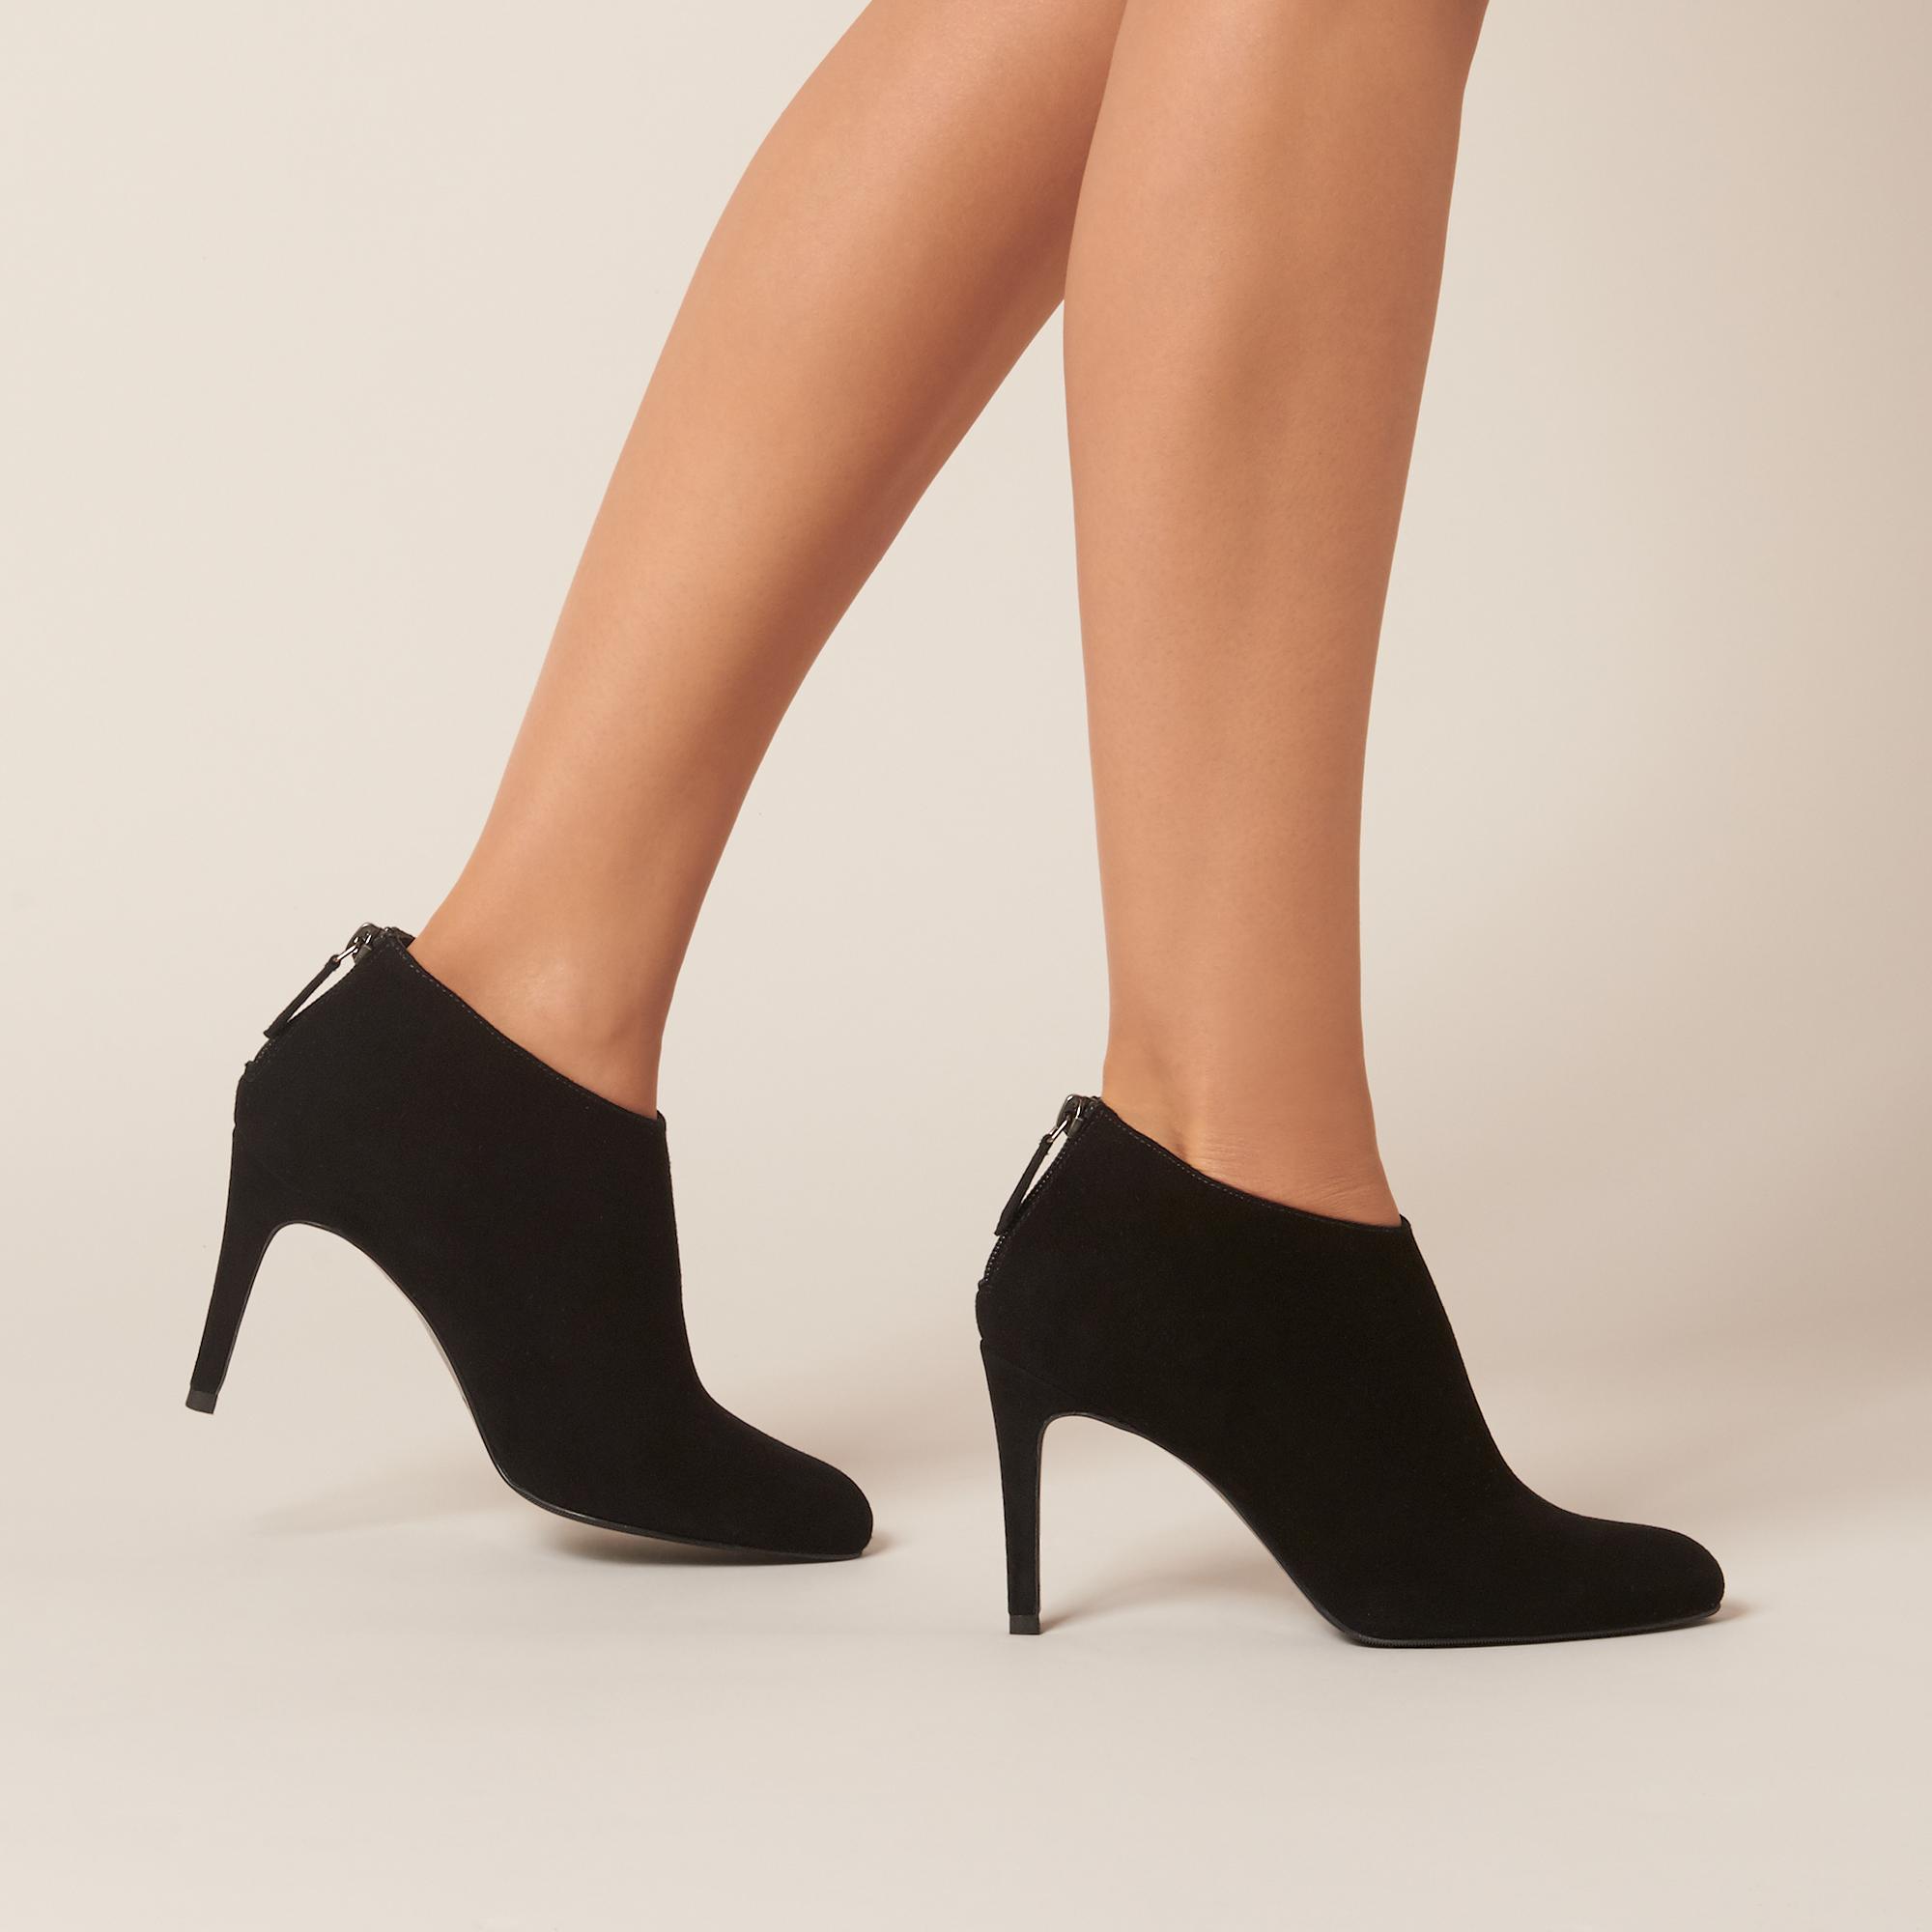 emily black suede ankle boots